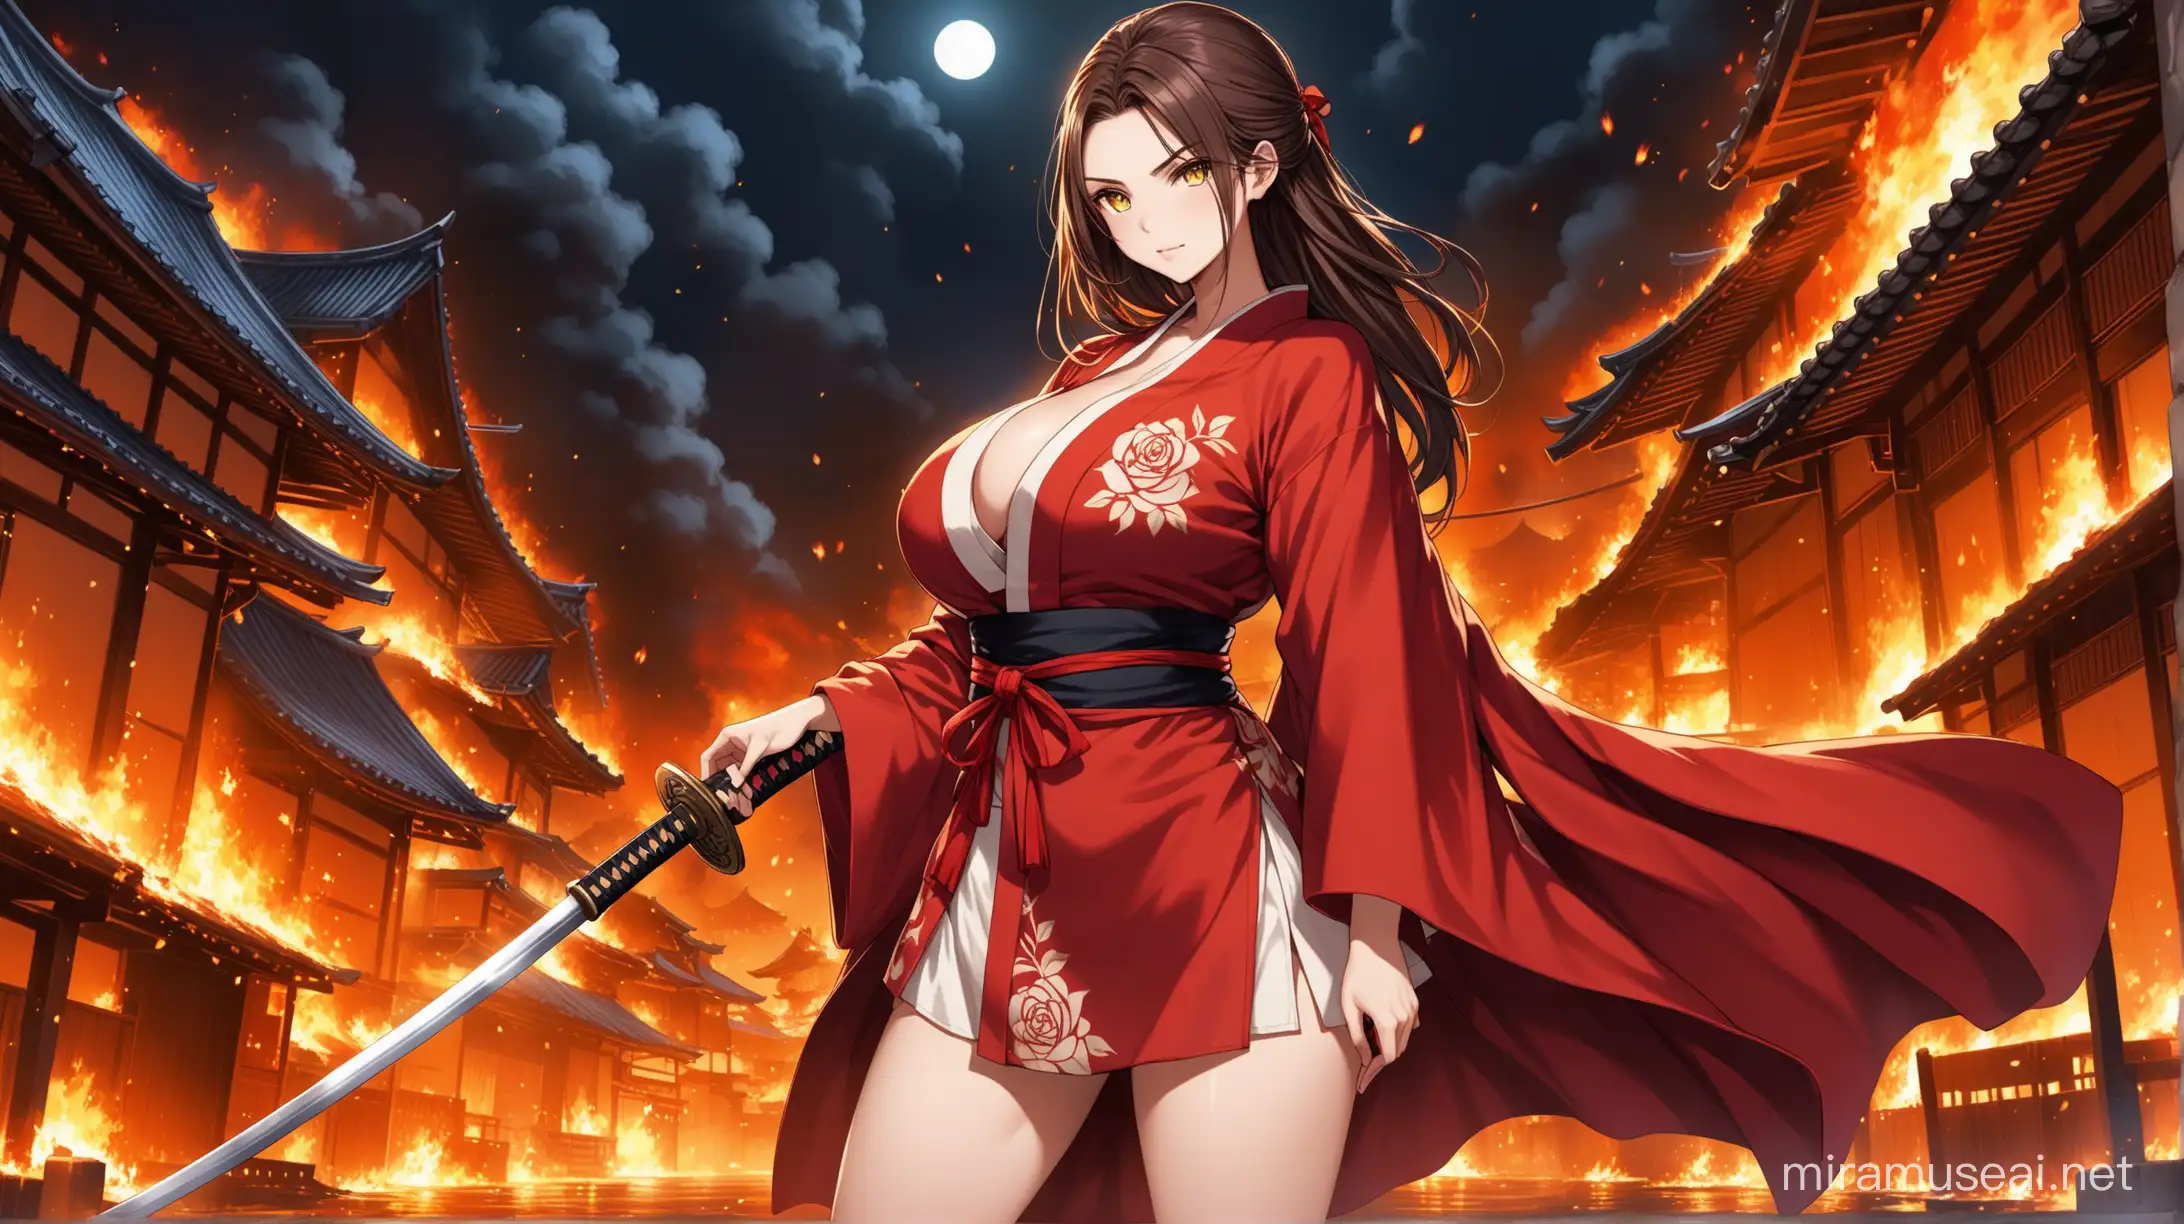 A 19 year old looking girl with brown long hair. With a red ribbon on the pony. She is wearing a red and white hewlan kimono. She have big boobs. She have yellow eyes. Above her wrist she have a tattoo of an elegant rose. In her hand she is holding a katana. Above her hewlan kimono she is hanging a white-golden-red themed coat like cape, like navy Admirals wear. Scorching flame fragments small as little are coming out of her neck. Background is a burnt massacred samurai town in night